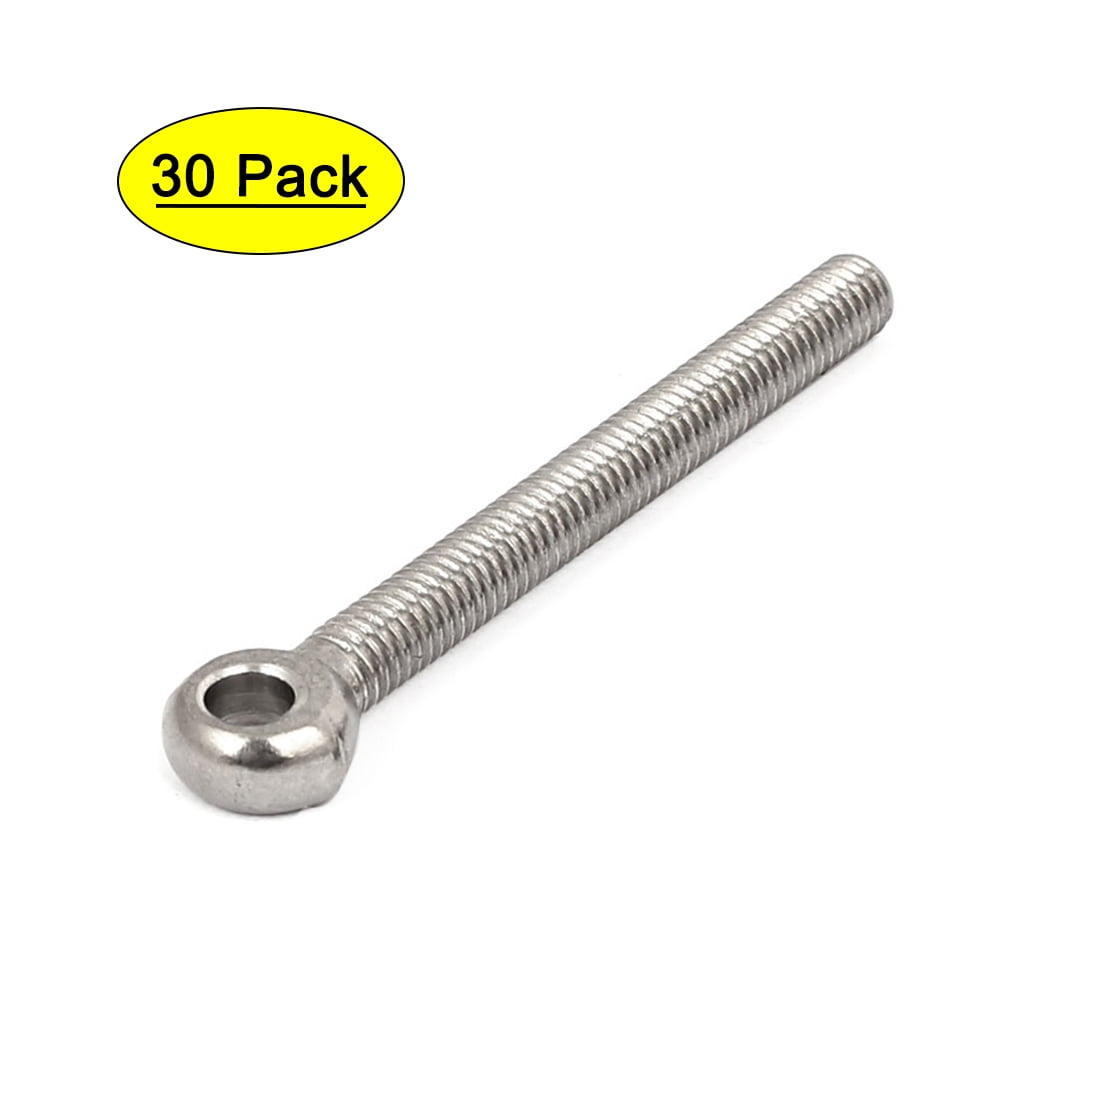 uxcell M6 x 60mm 304 Stainless Steel Machine Shoulder Lift Eye Bolt Rigging 20pcs 